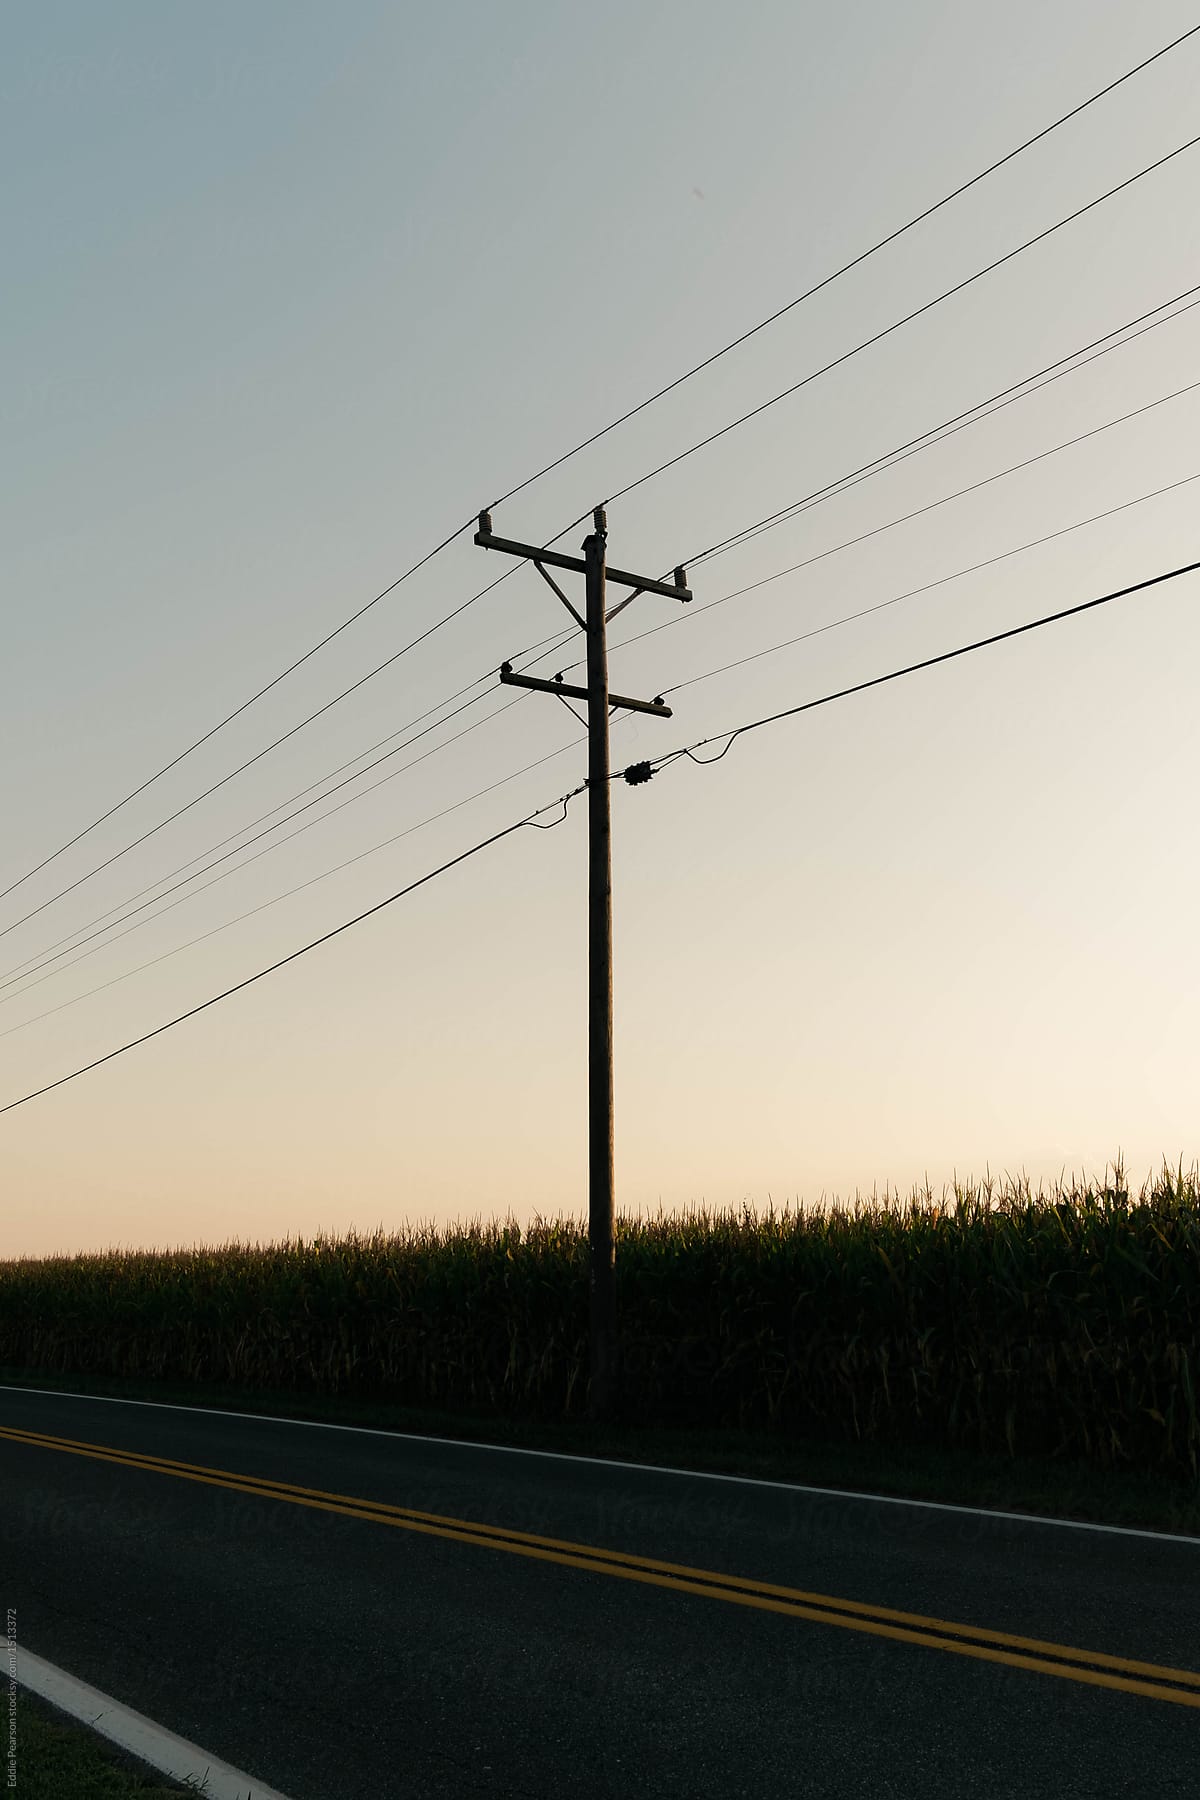 Sunset and power lines